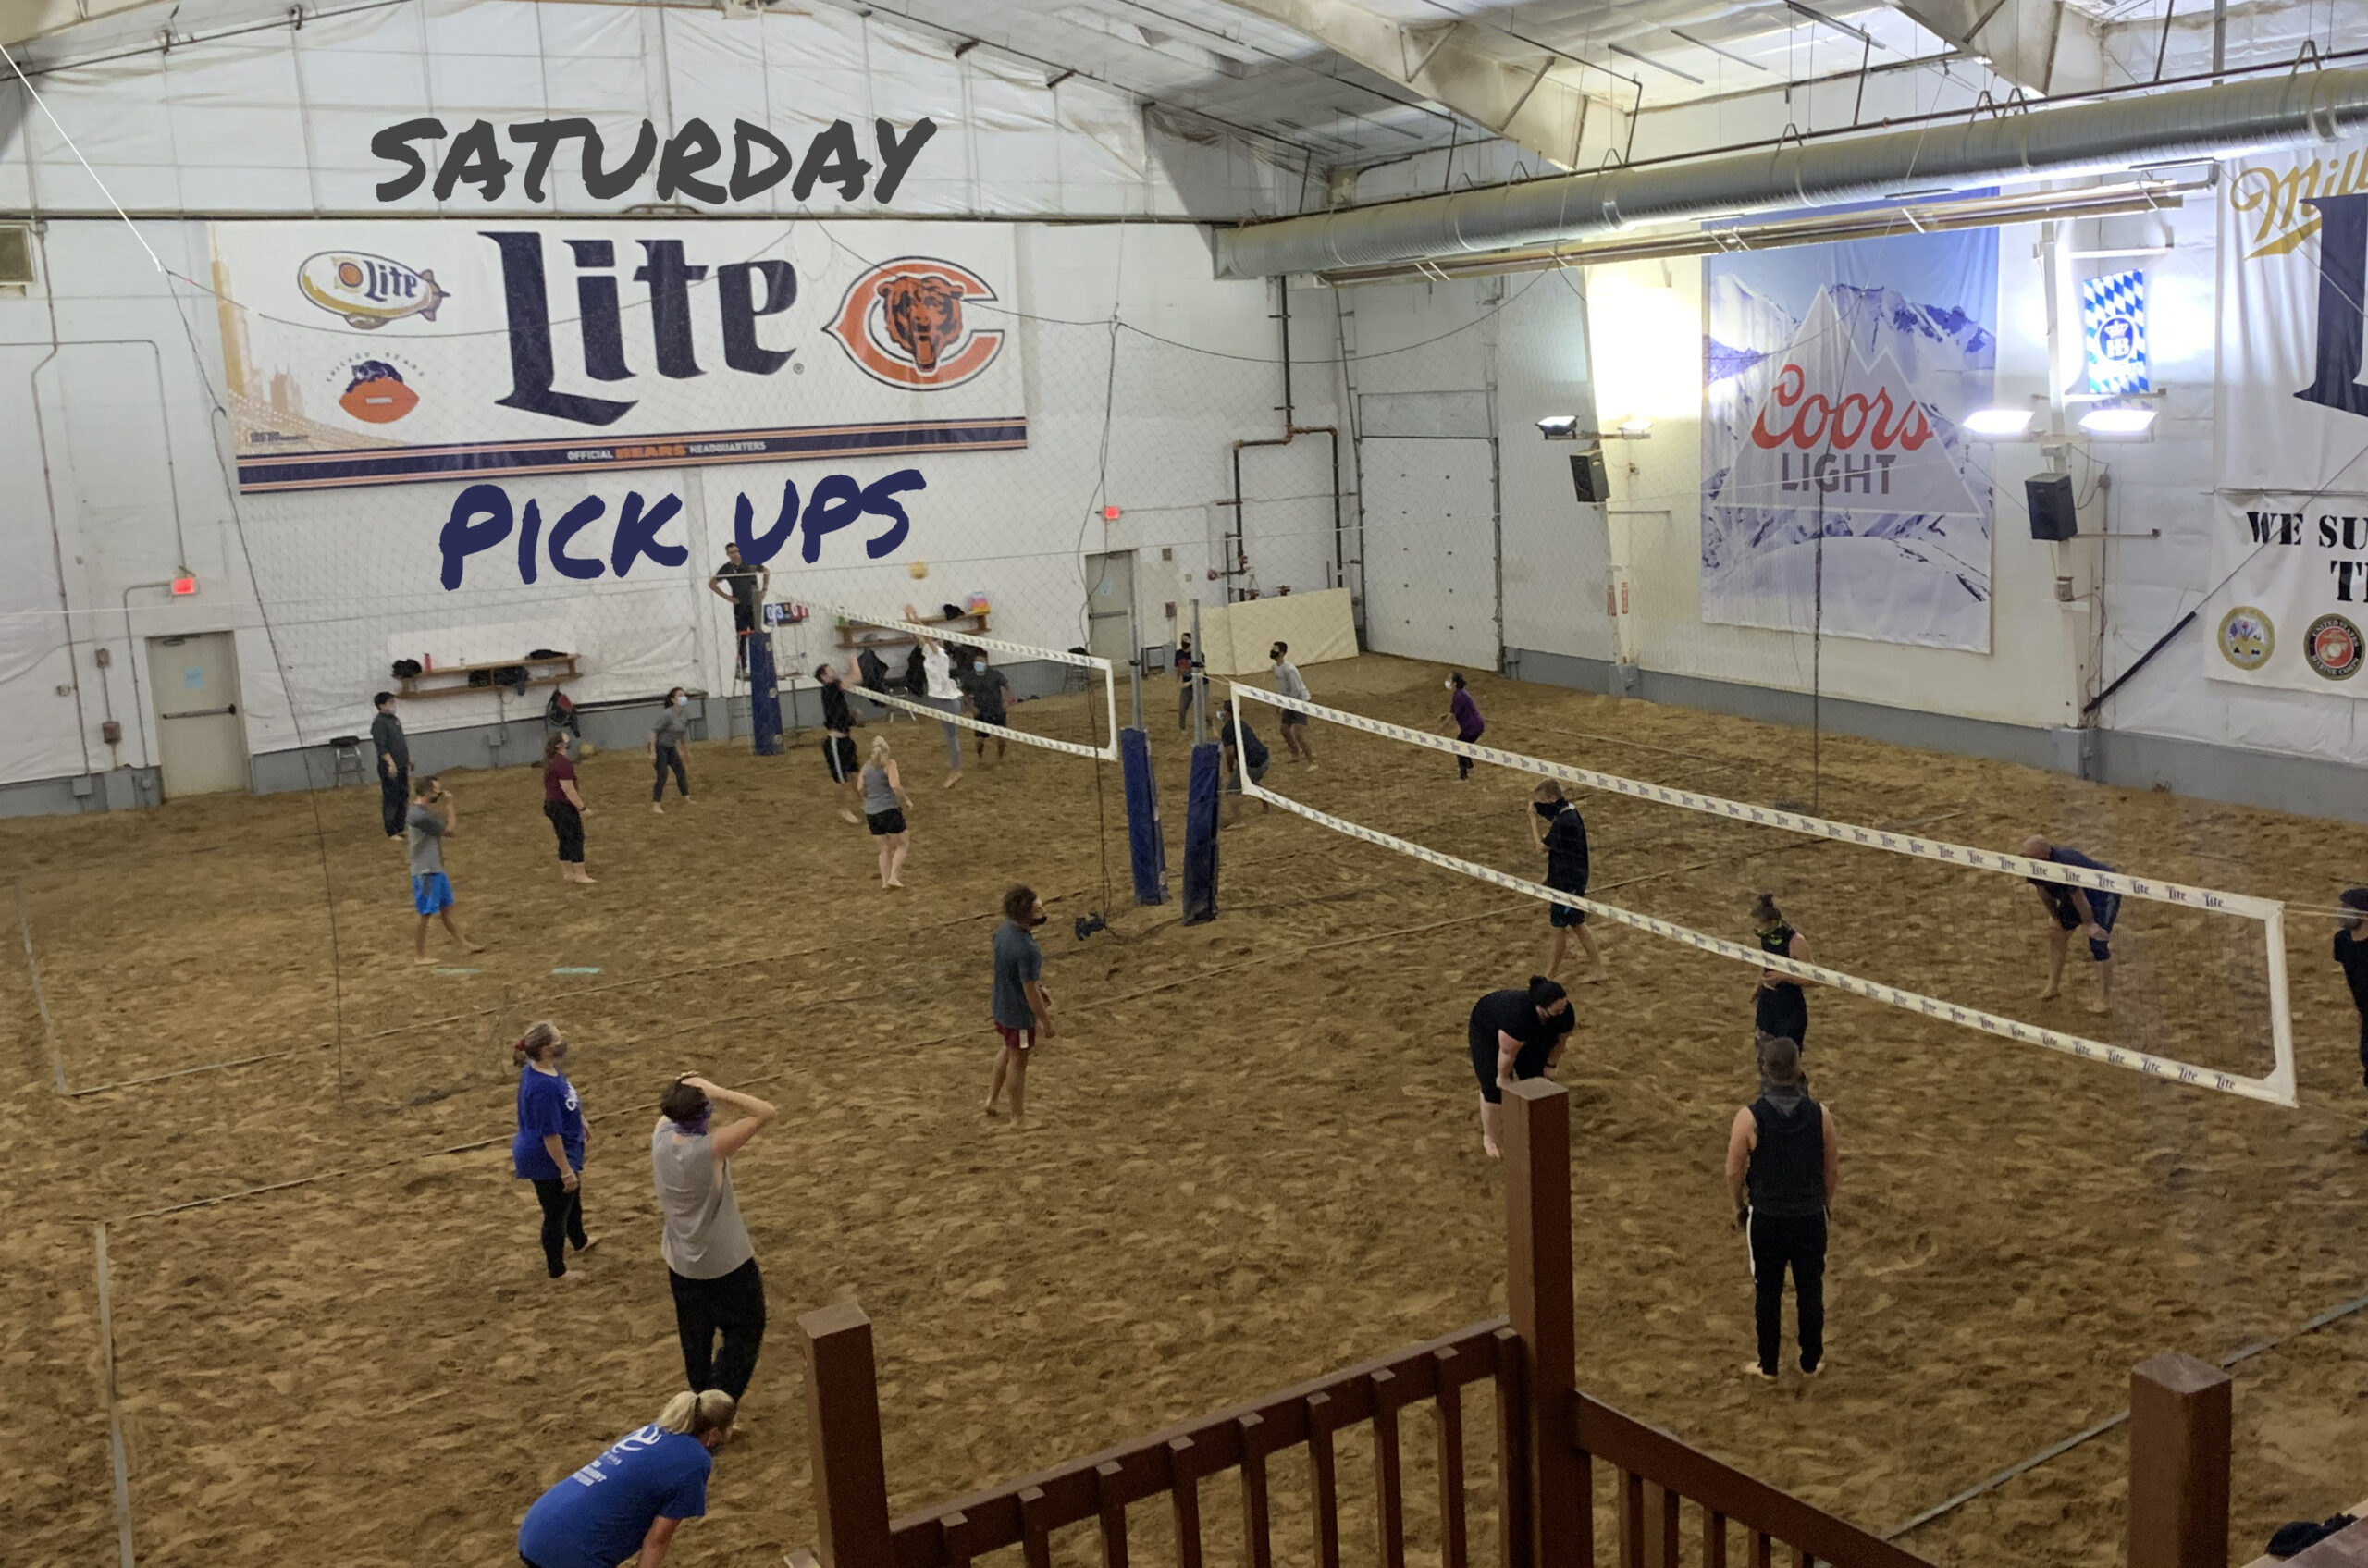 SATURDAY Pickup Sessions outside only All day outside only (lodge has events) PURCHASE AT BAR